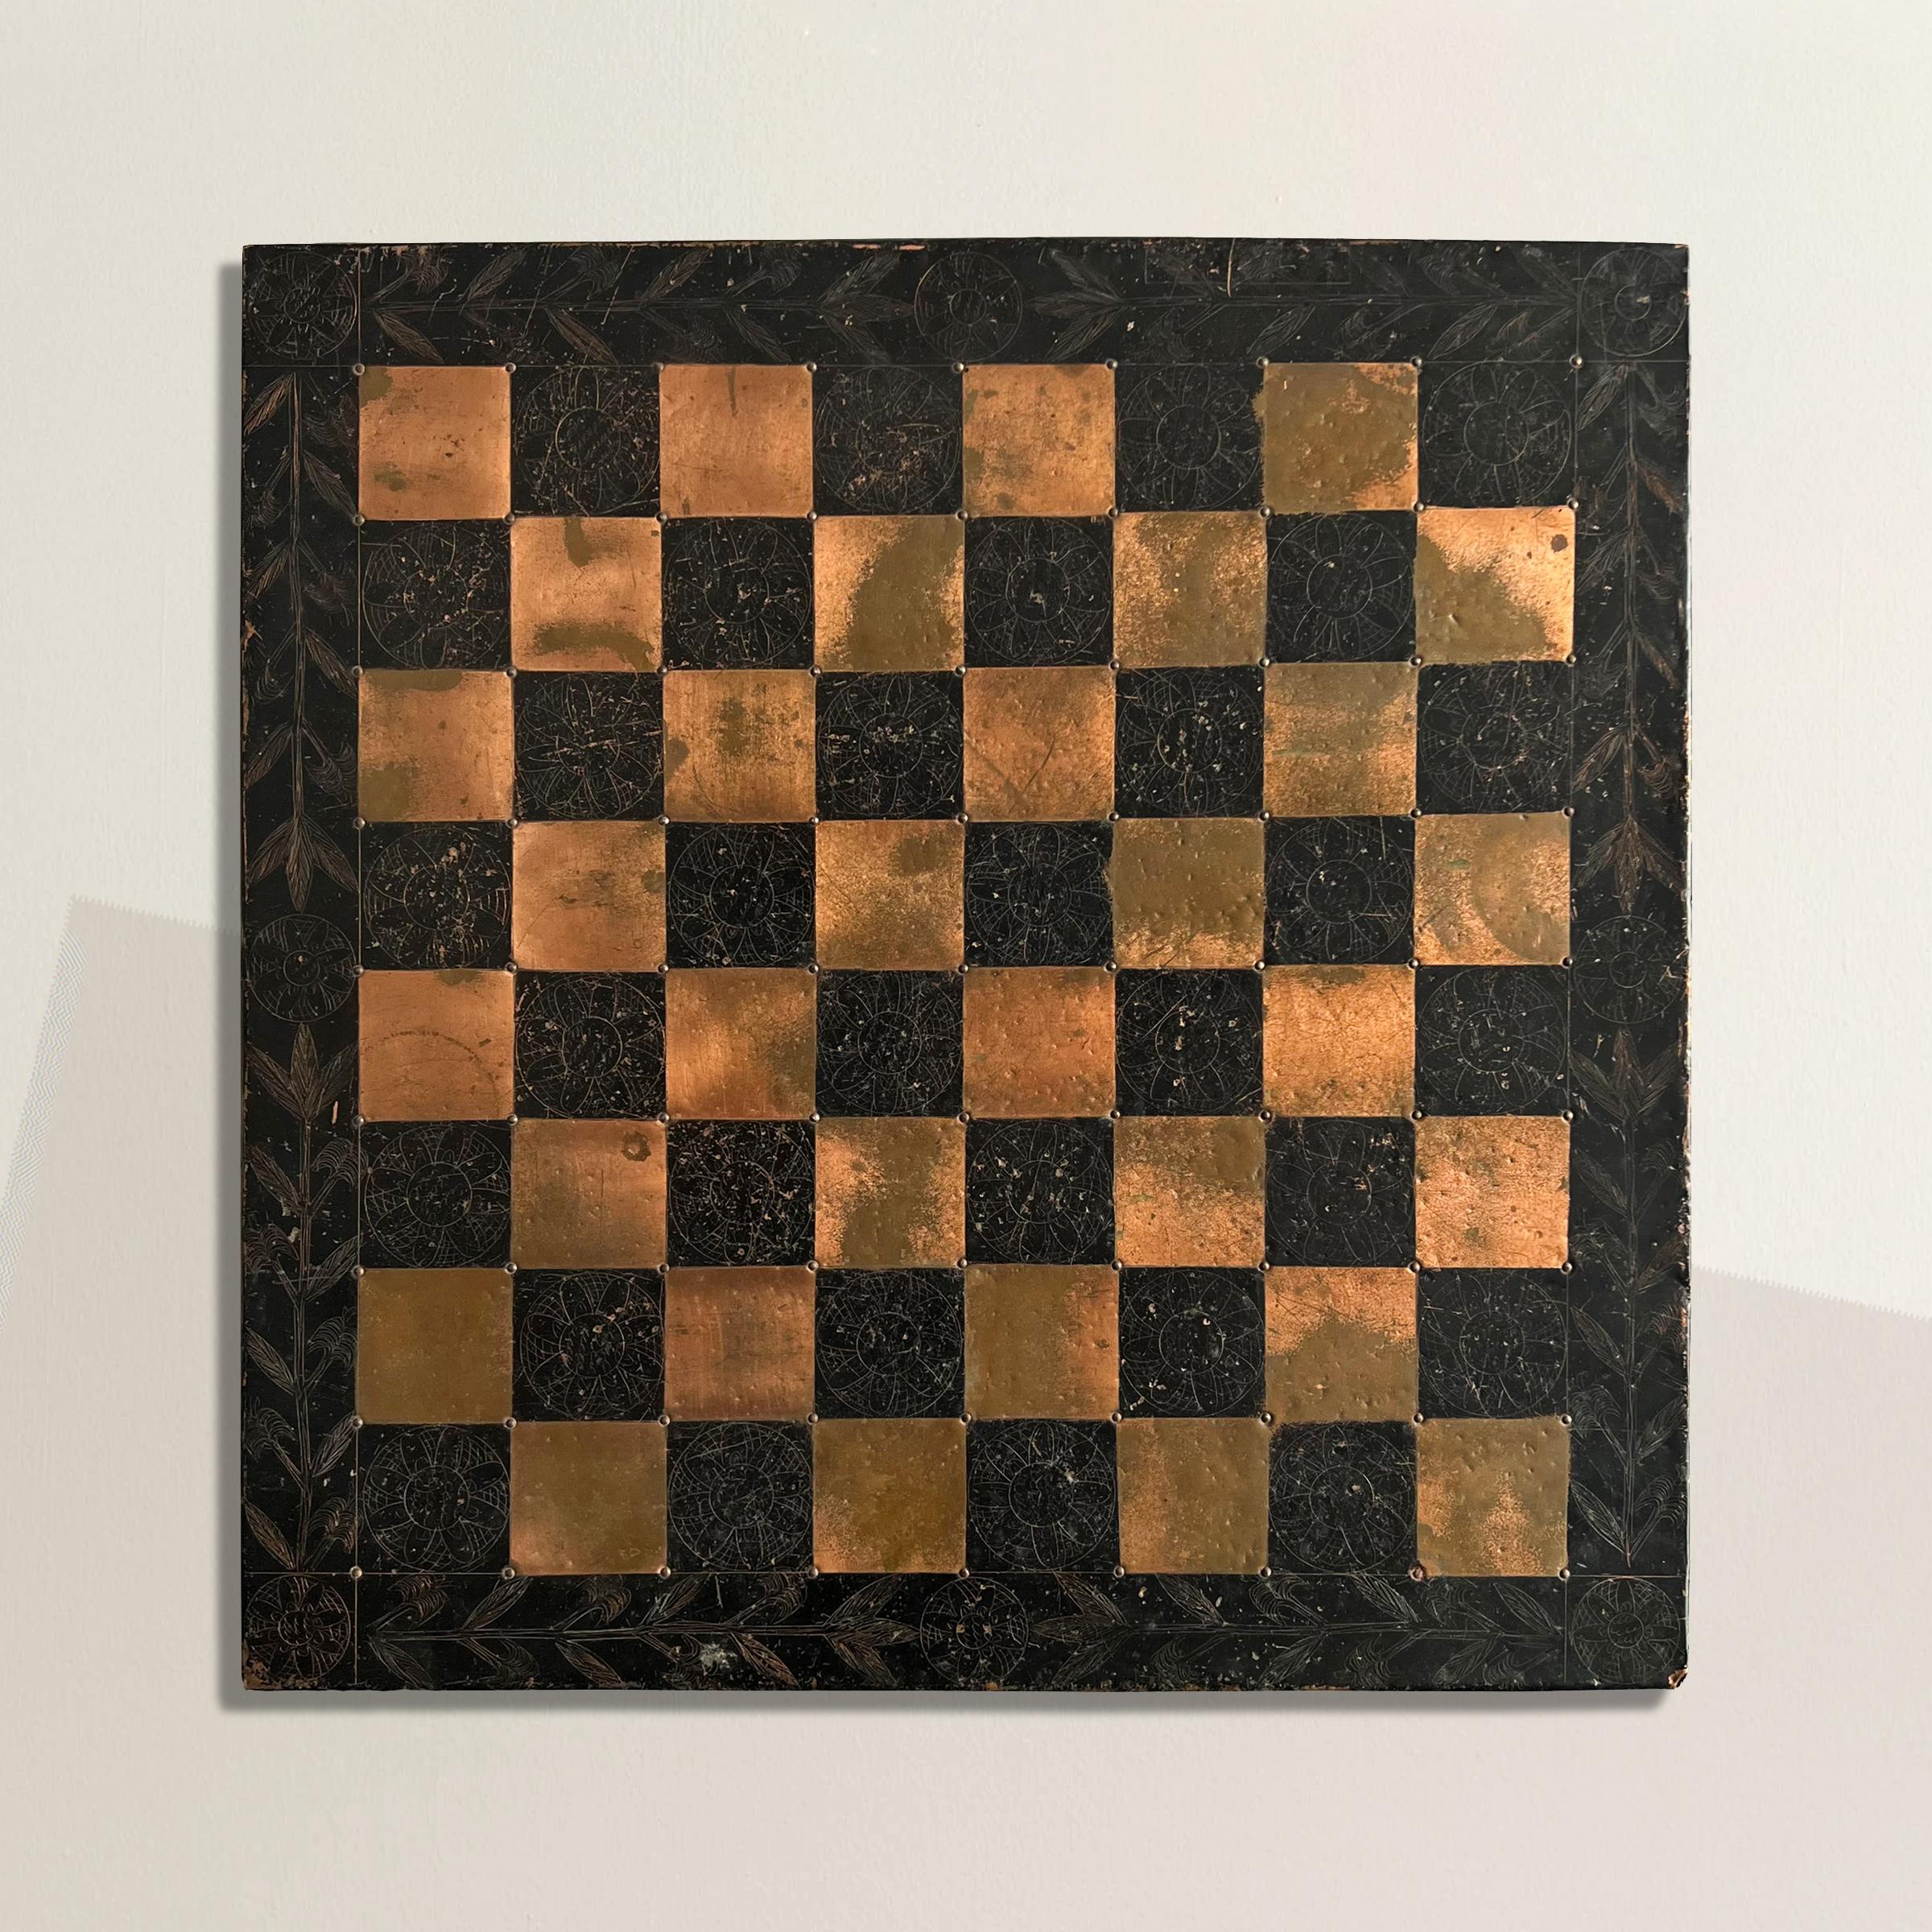 This enchanting mid-20th century American Folk Art chess board is a true testament to naive and outsider craftsmanship and creativity. Hand-crafted with meticulous care, the board features alternating copper and tin squares adorned with delicate